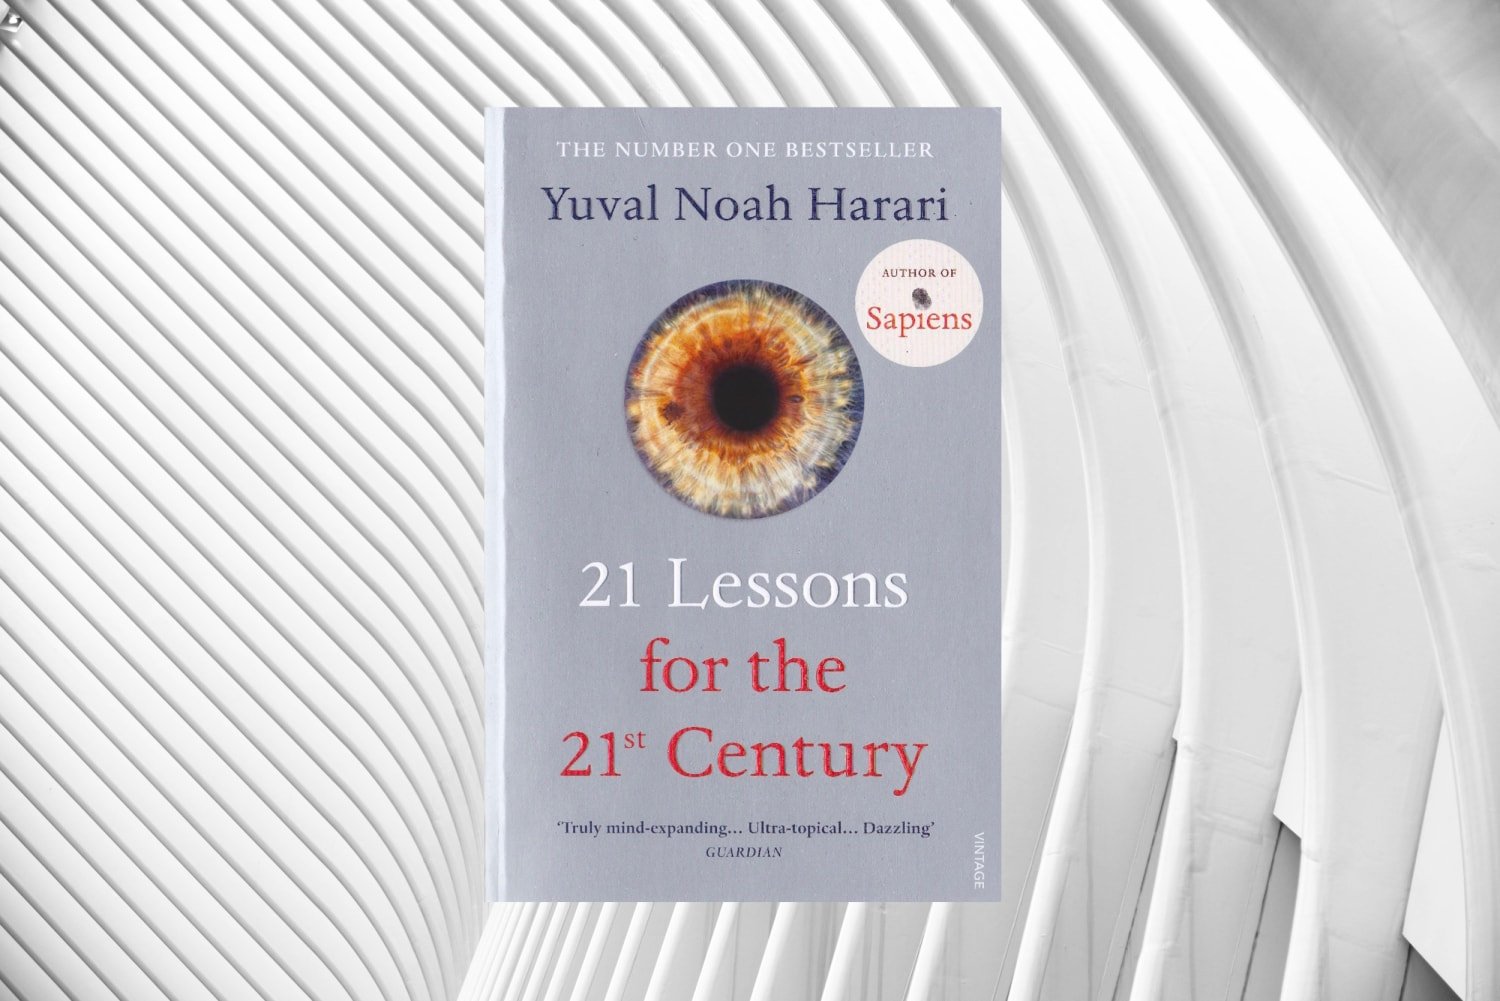 Book cover showing an eye, with a backdrop of grey